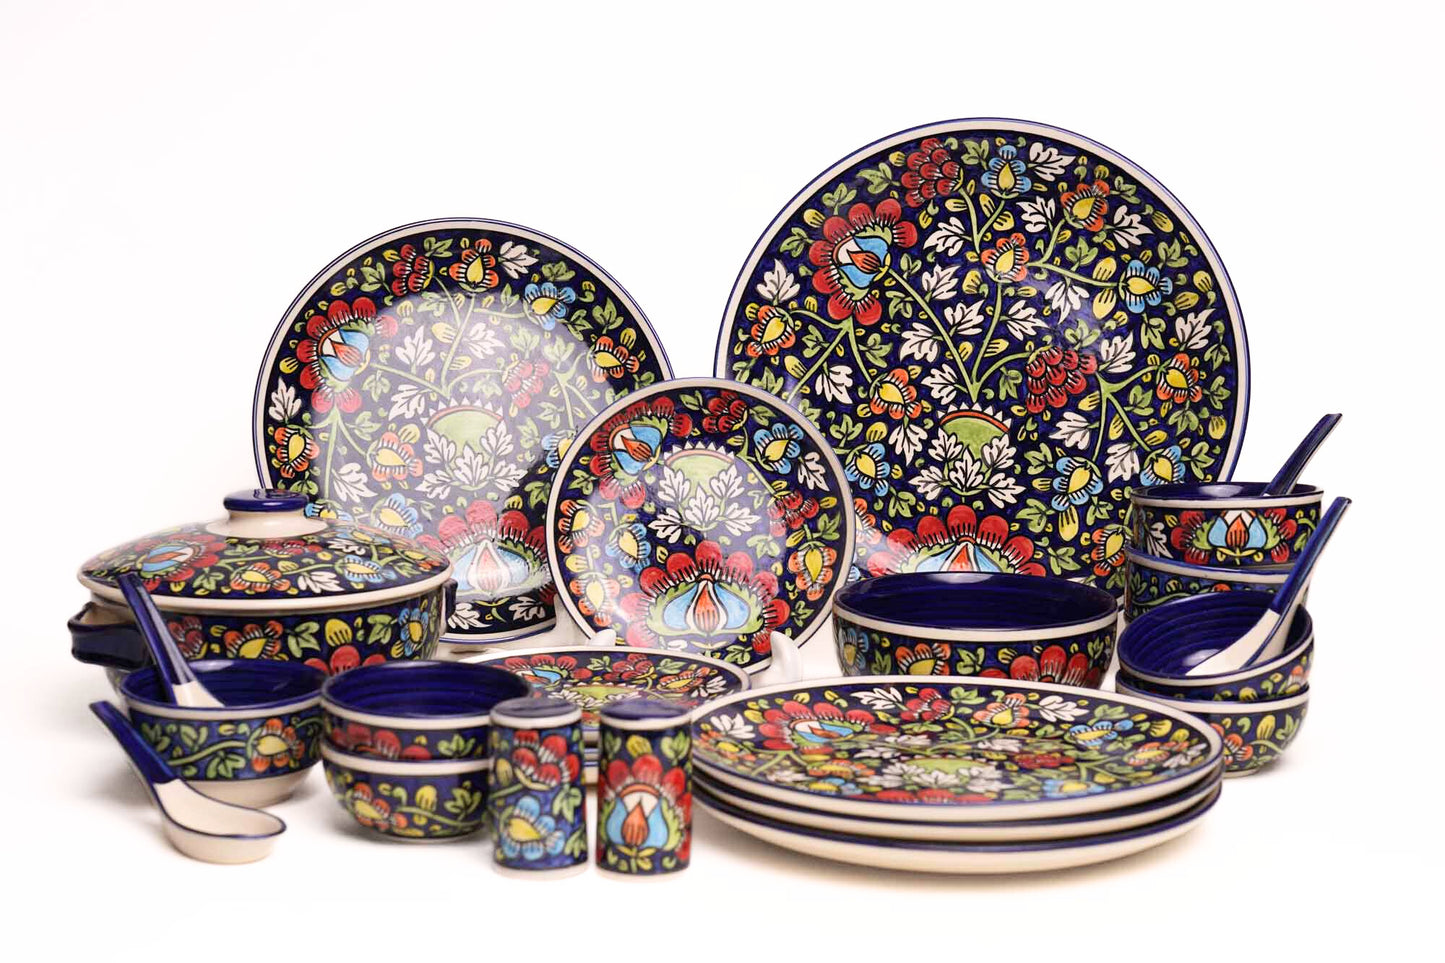 Baagh Dinner Set for 4 - 25 Pieces